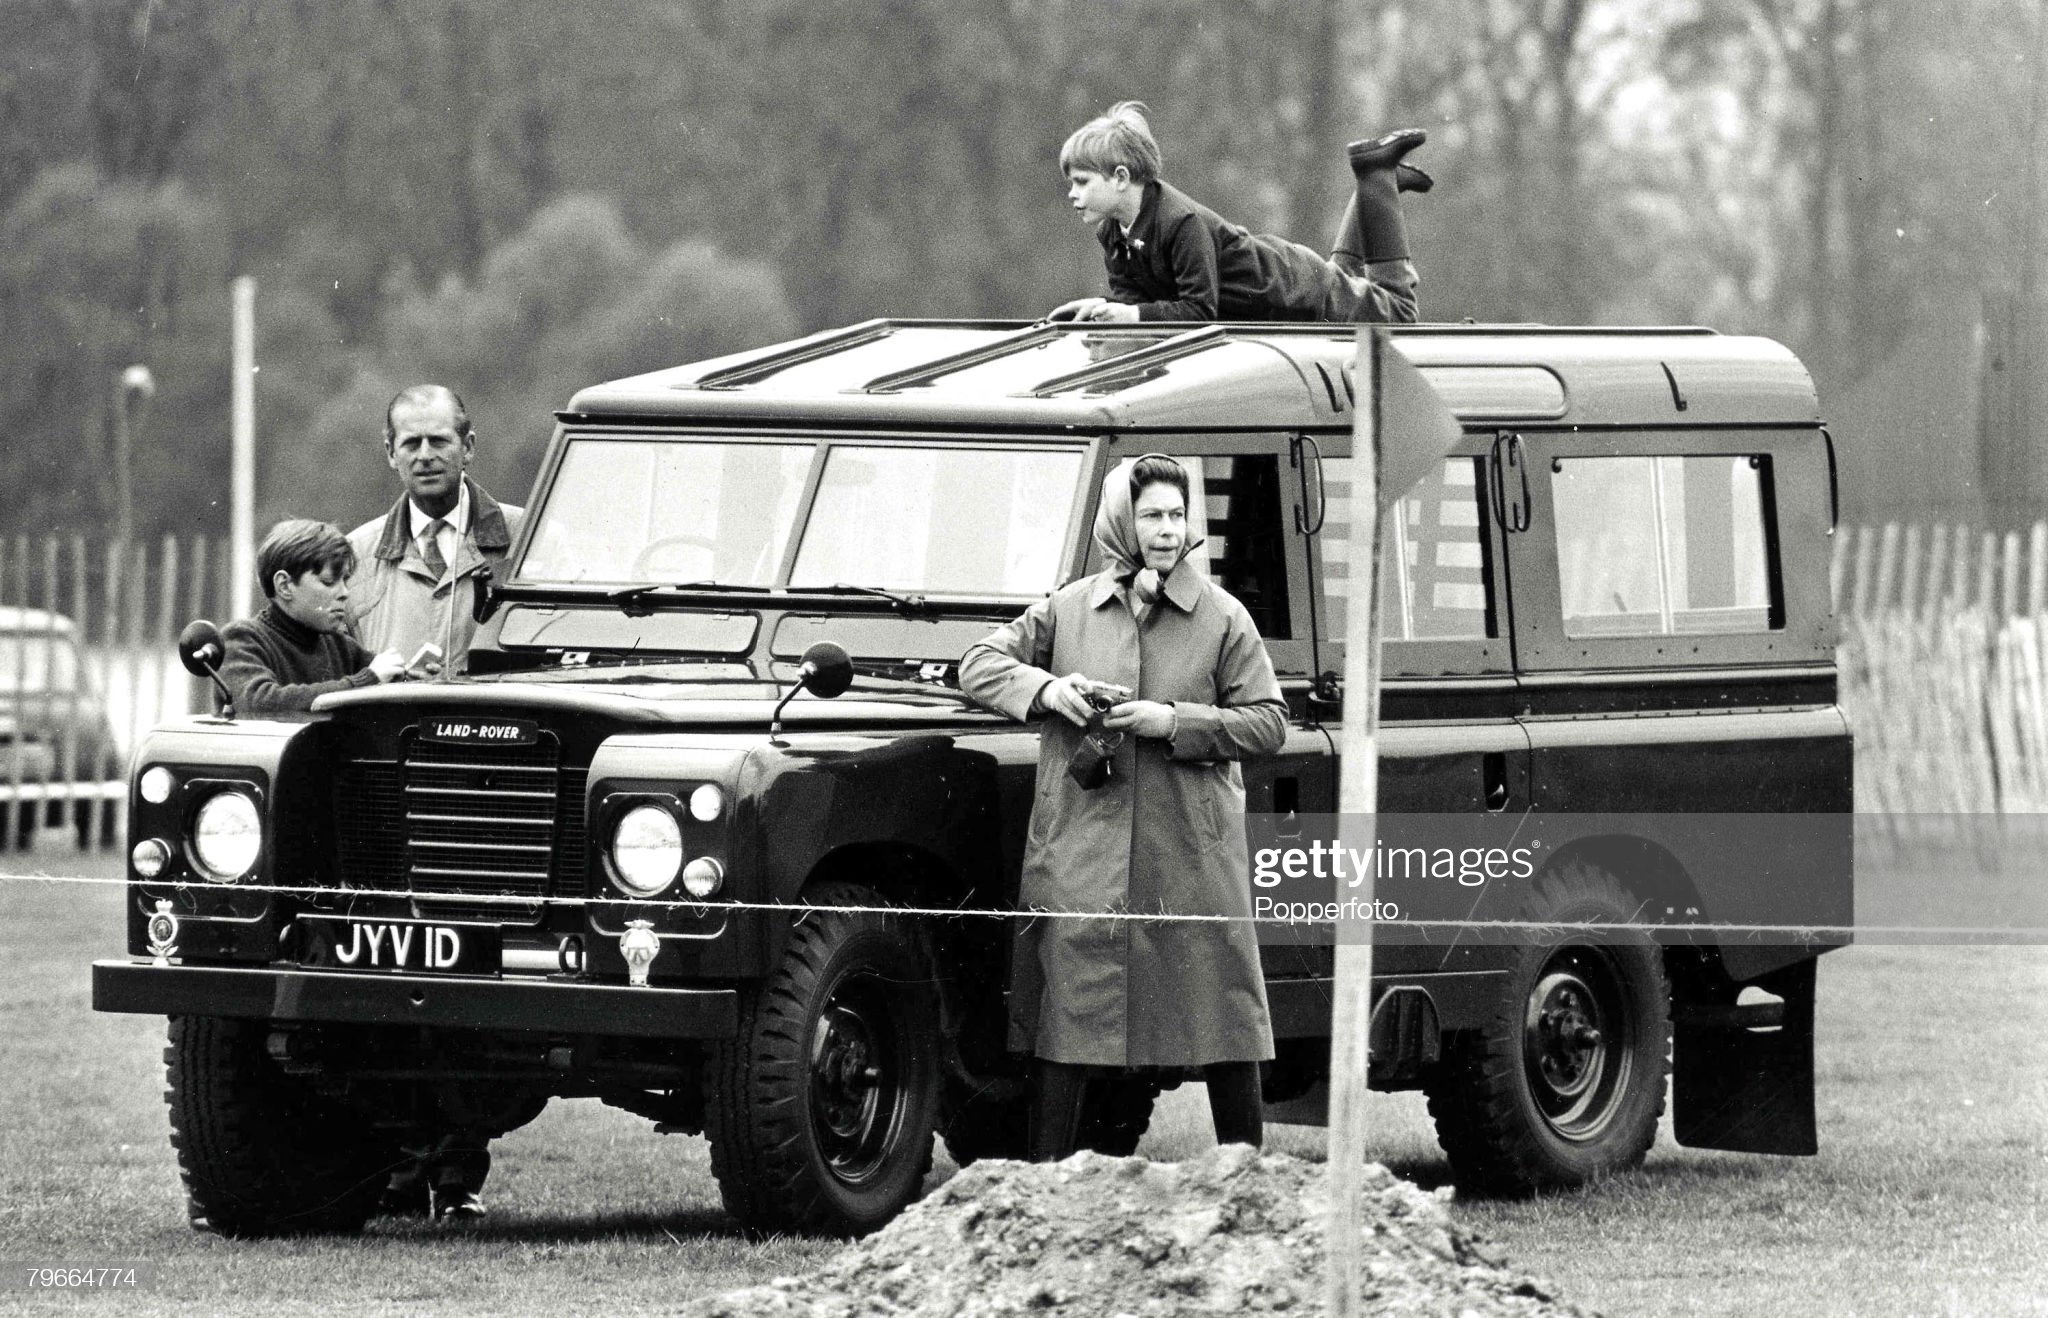 Royalty, 20th April 1972. A picture of Prince Edward on the roof of the Royal car watching the Windsor horse trials with, left to right, Prince Andrew, Duke of Edinburgh (Prince Philip) and H.R.H Queen Elizabeth II.